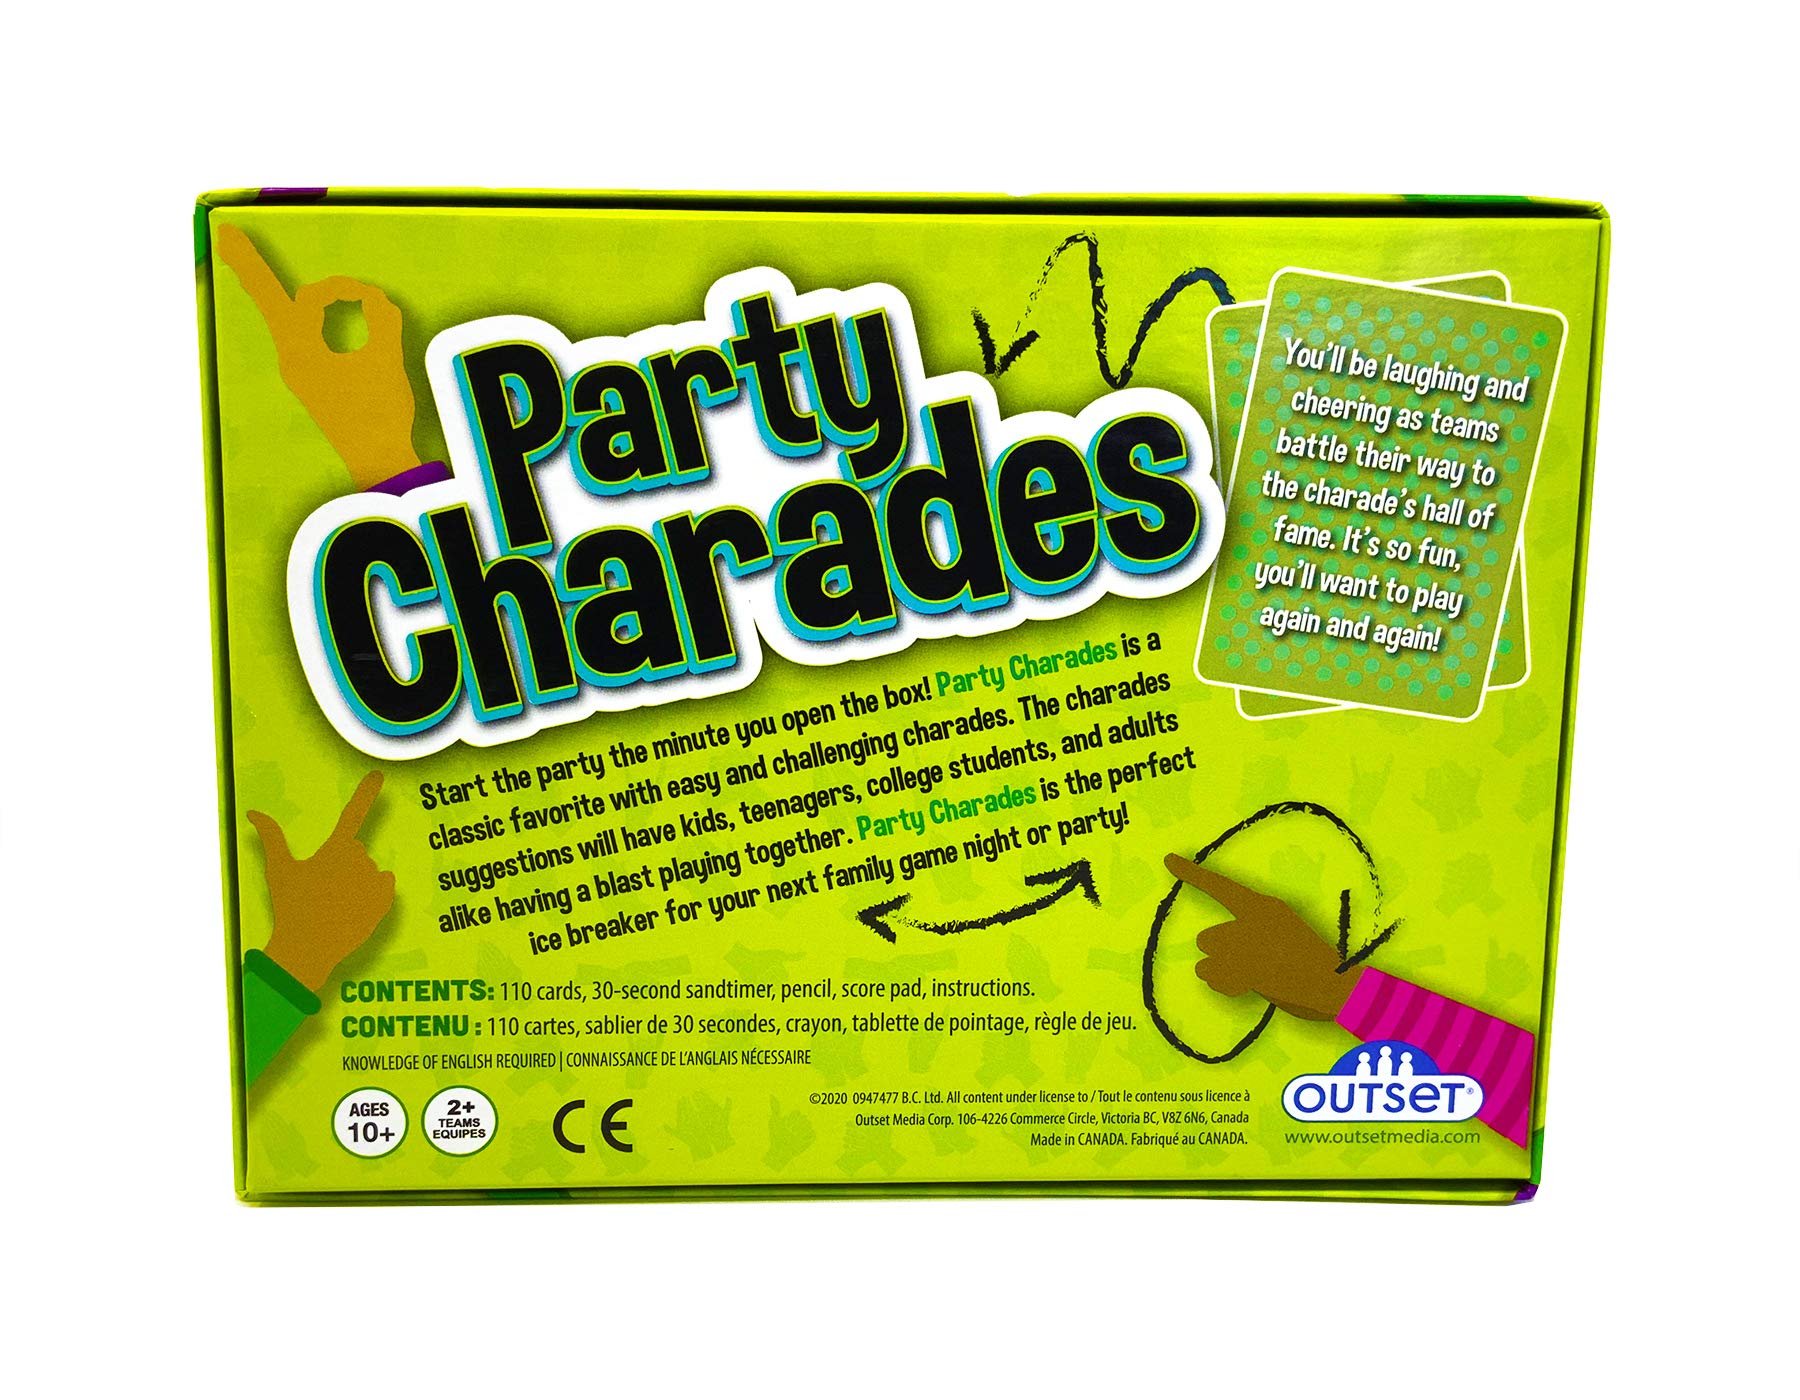 Party Charades Game – Contains 550 charades – Great Family Game for 2 or More Players Ages 10 and up by Outset Media